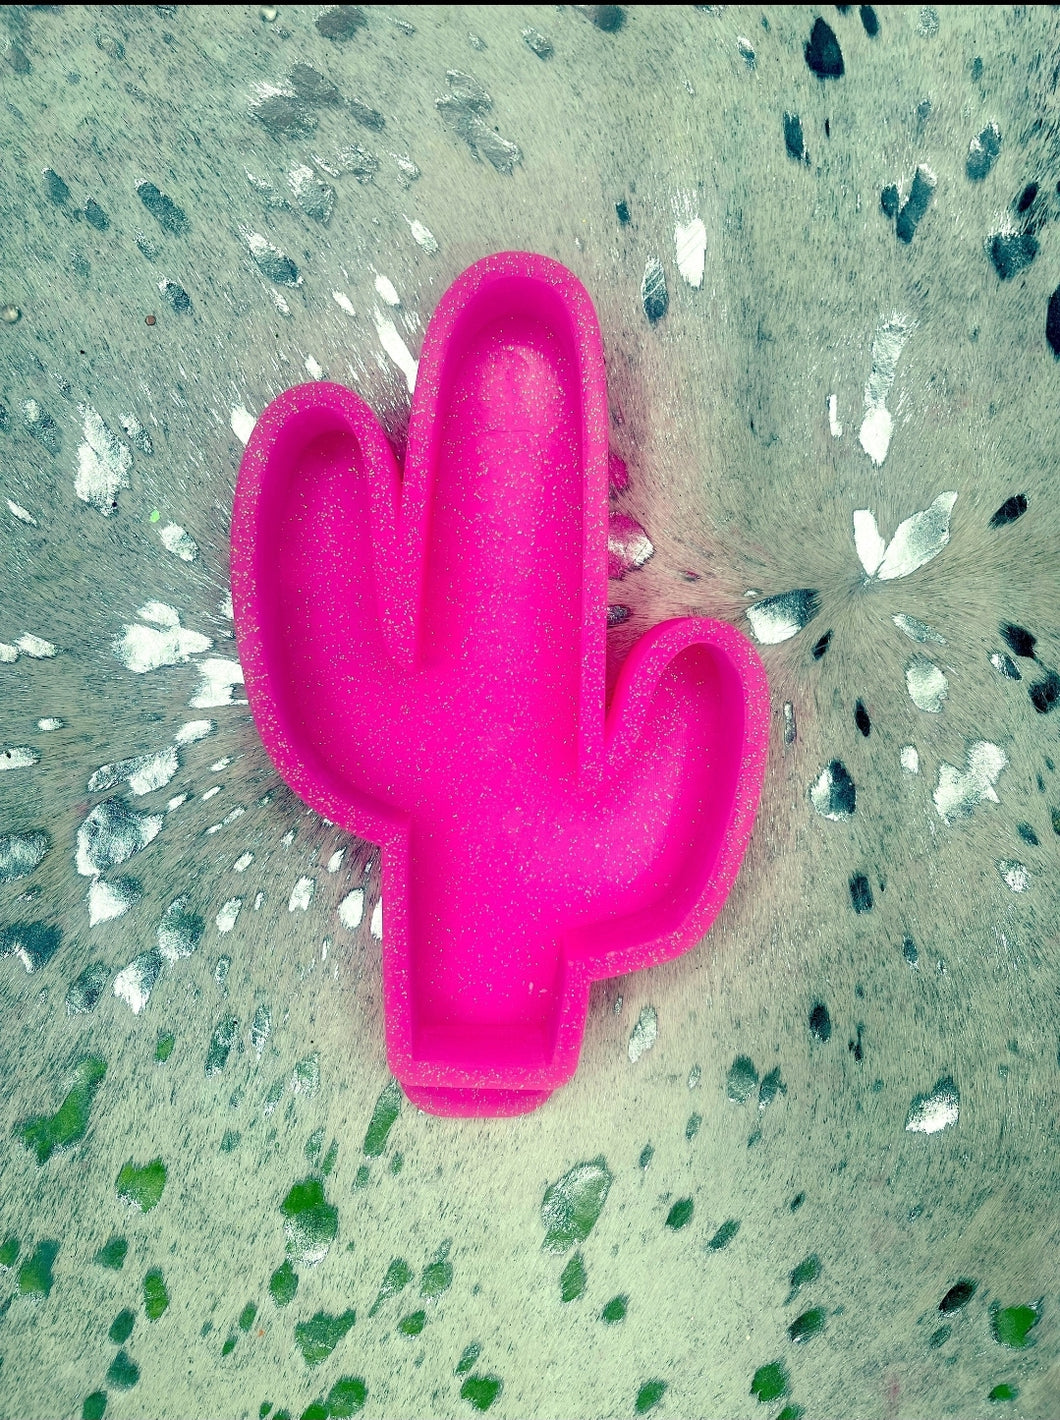 Potted Cactus Silicone Freshie Mold Size 1.75 Wide x 4 Long x 1 Deep Car  Freshie Cactus Western Theme for Freshies 